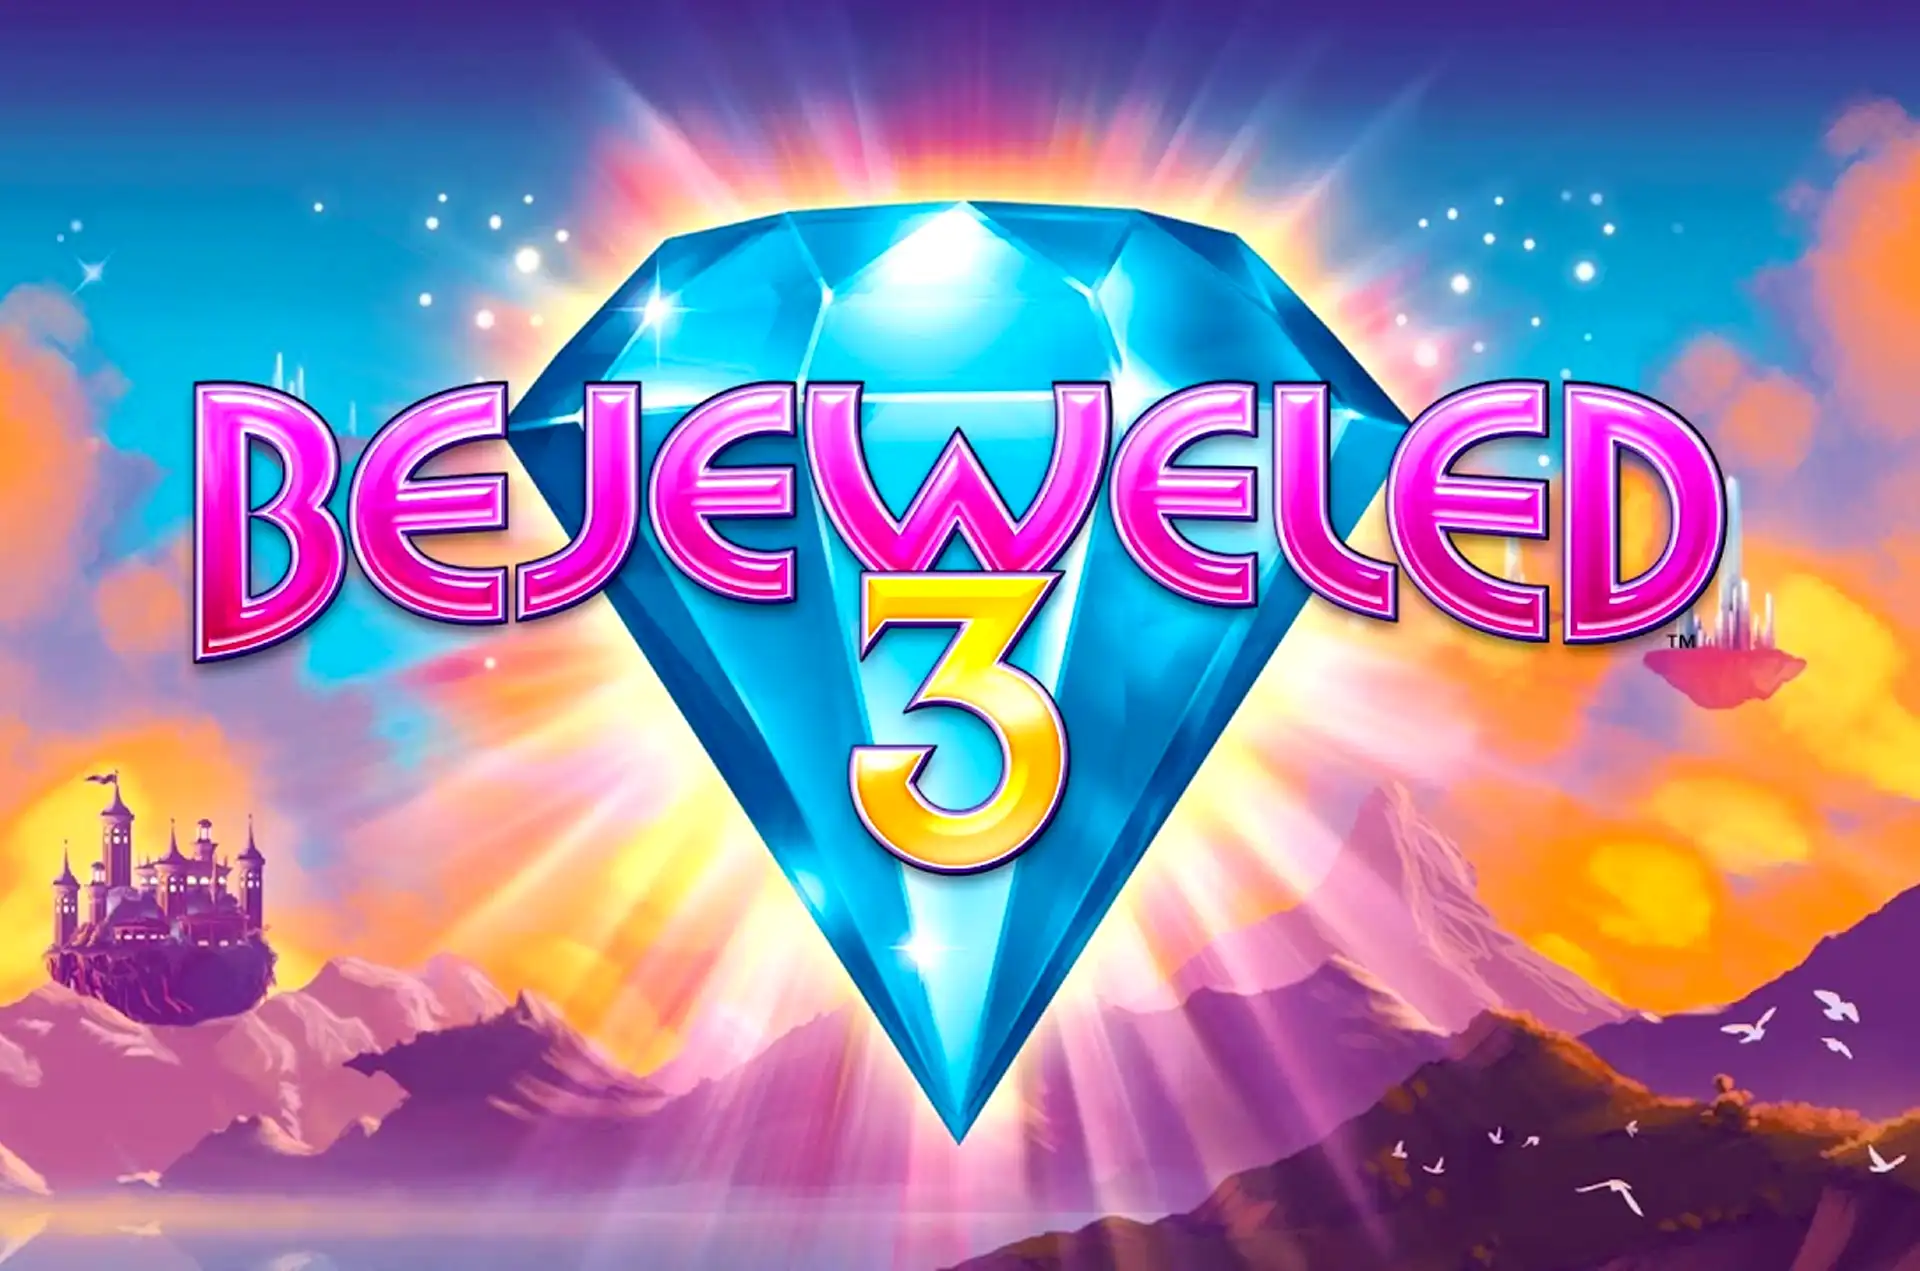 A Classic Bejeweled 3 Game